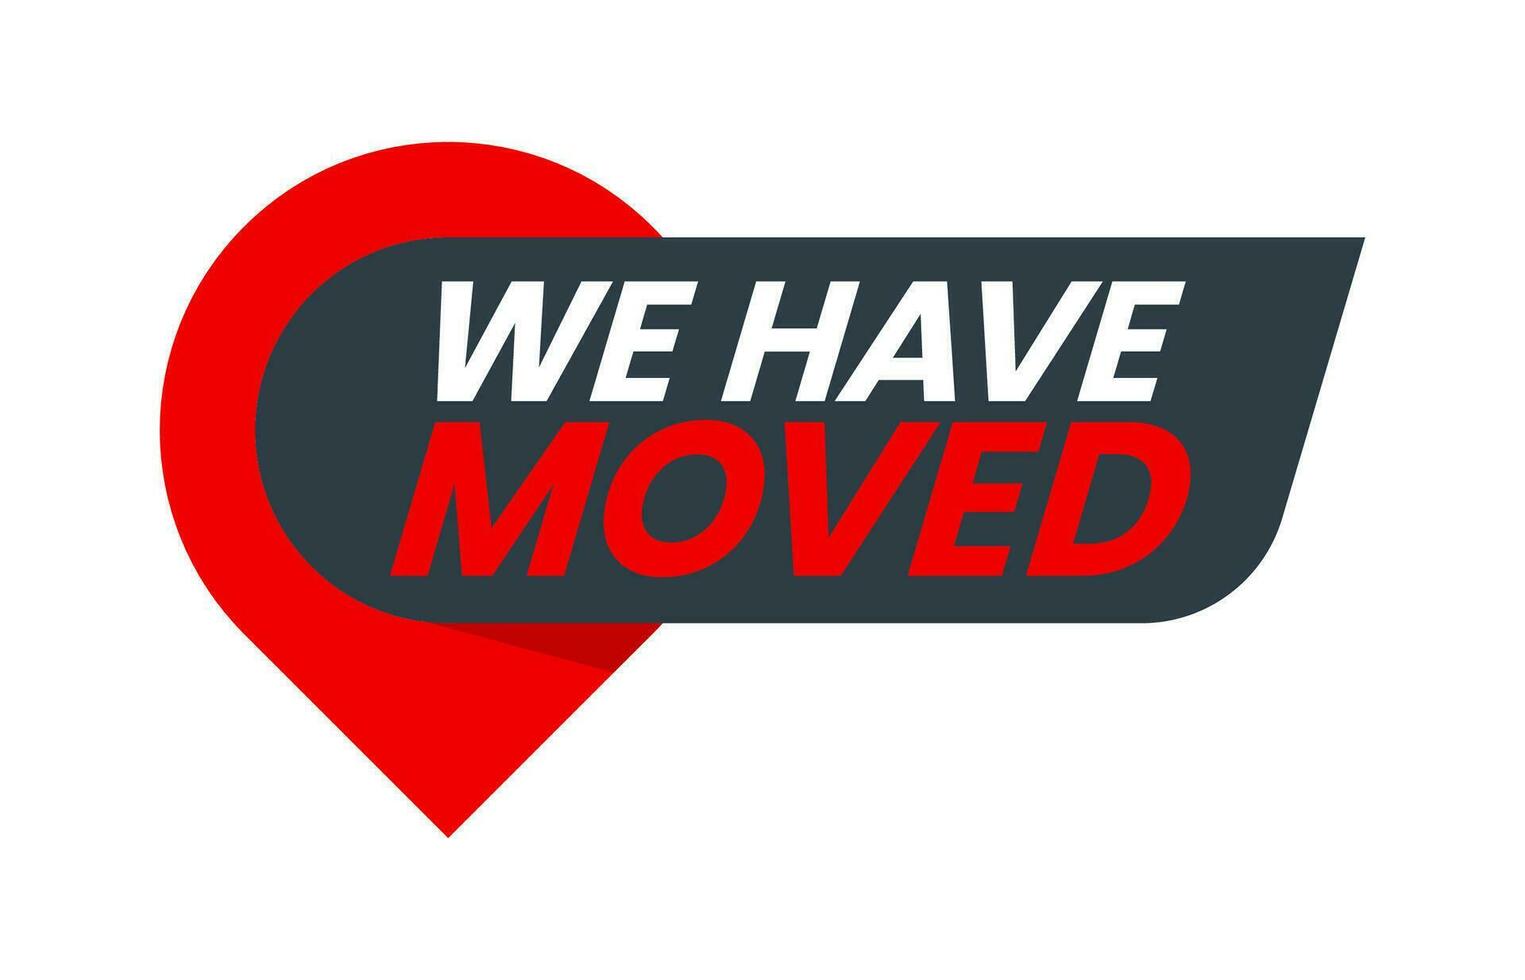 Have move icon, we have moved announcement sign vector